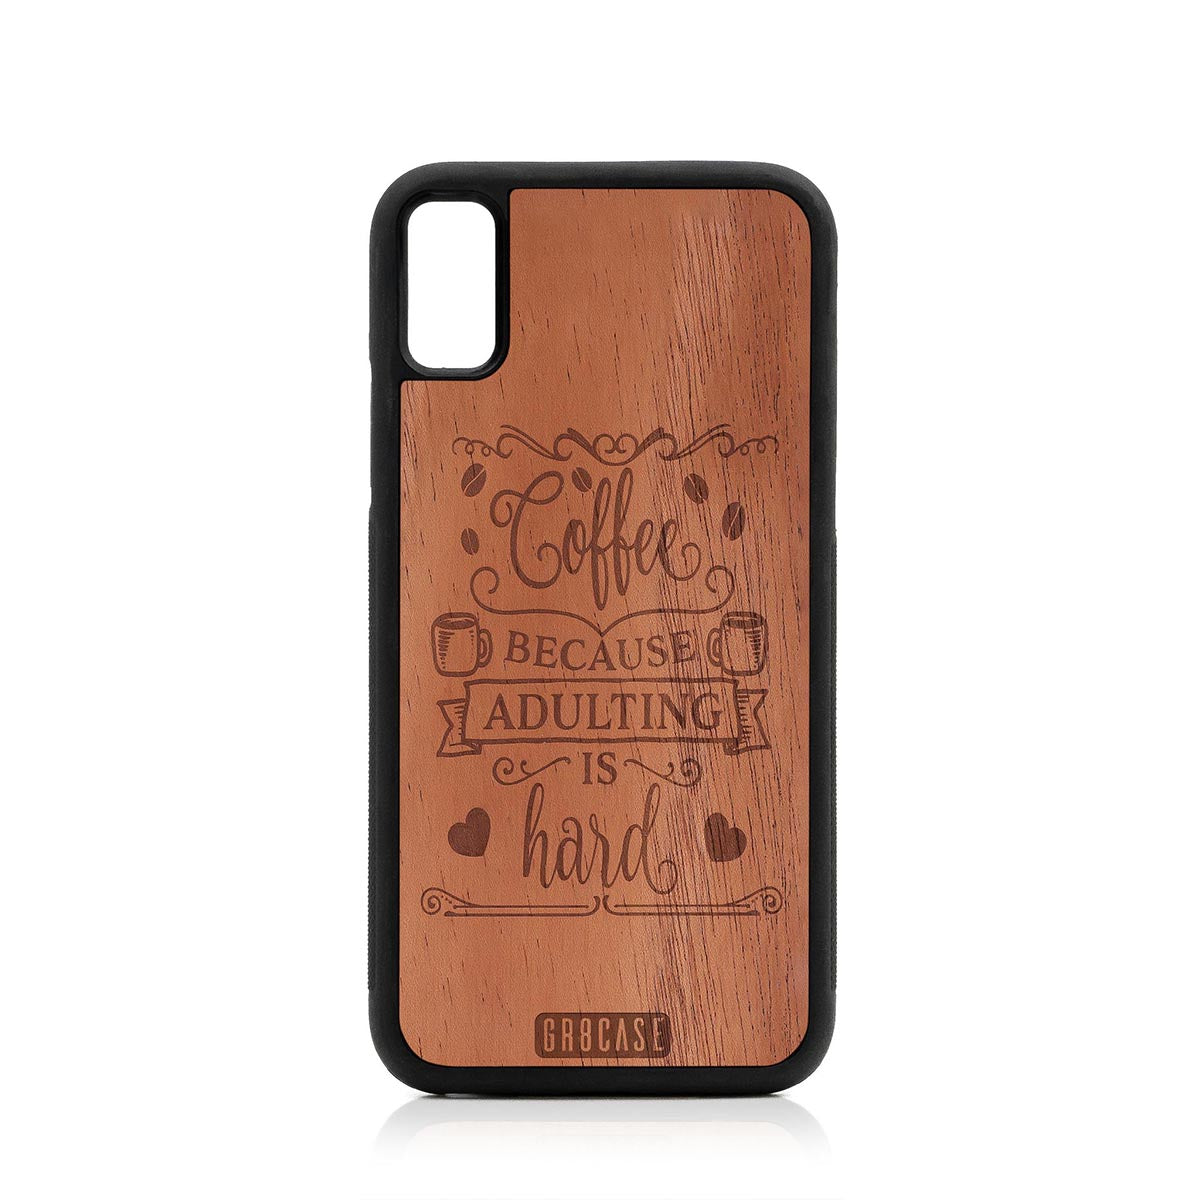 Coffee Because Adulting Is Hard Design Wood Case For iPhone XR by GR8CASE